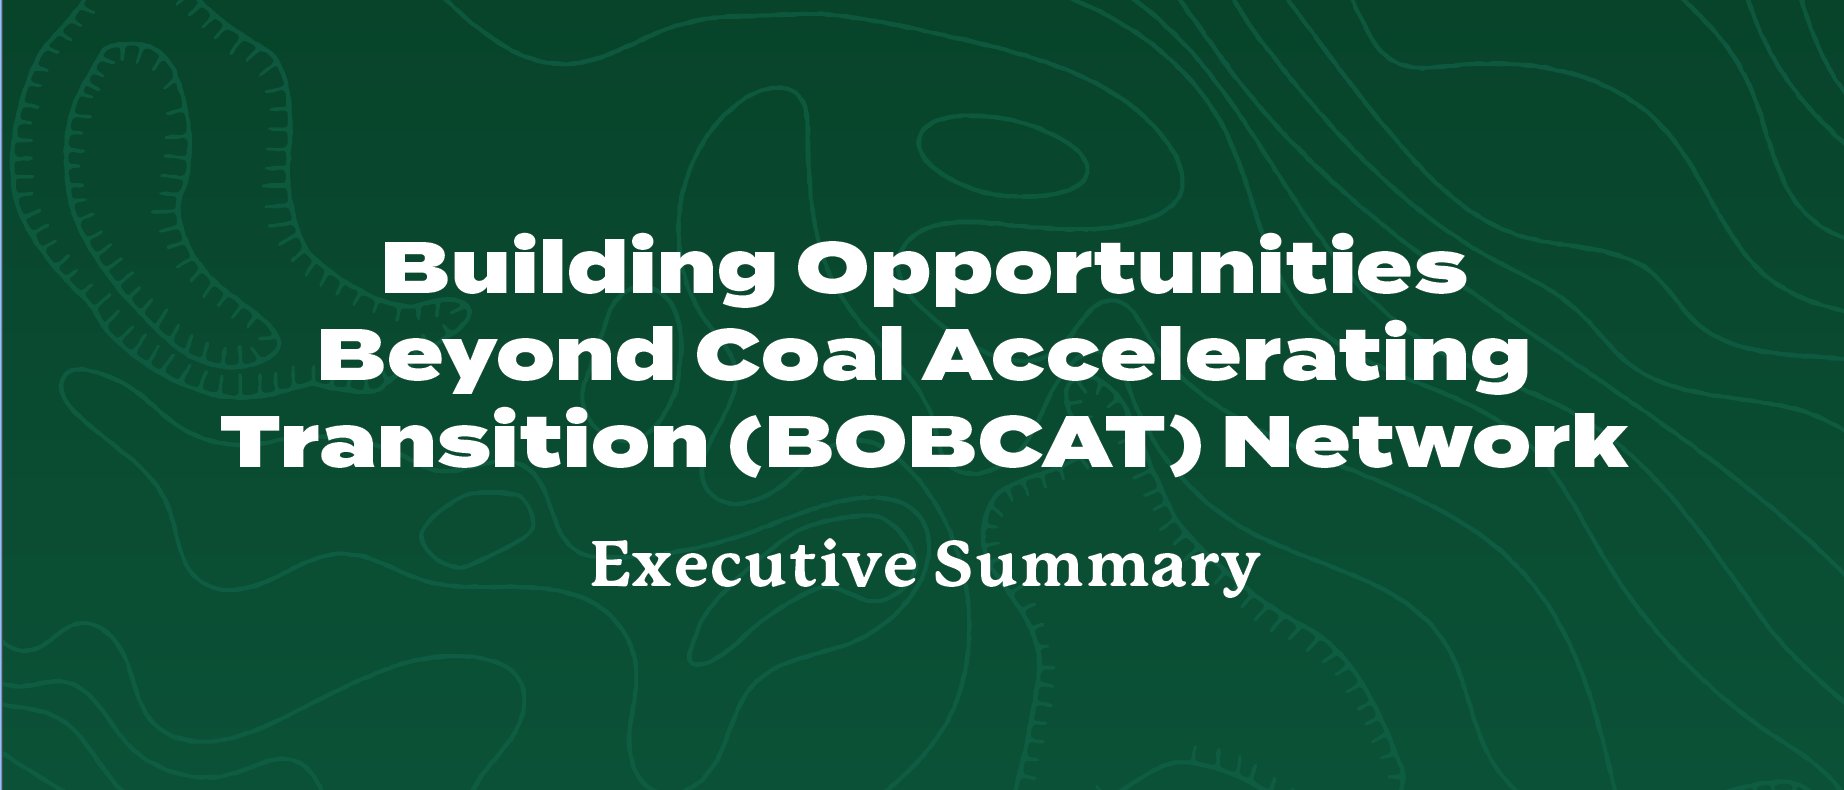 bobcat network cover image